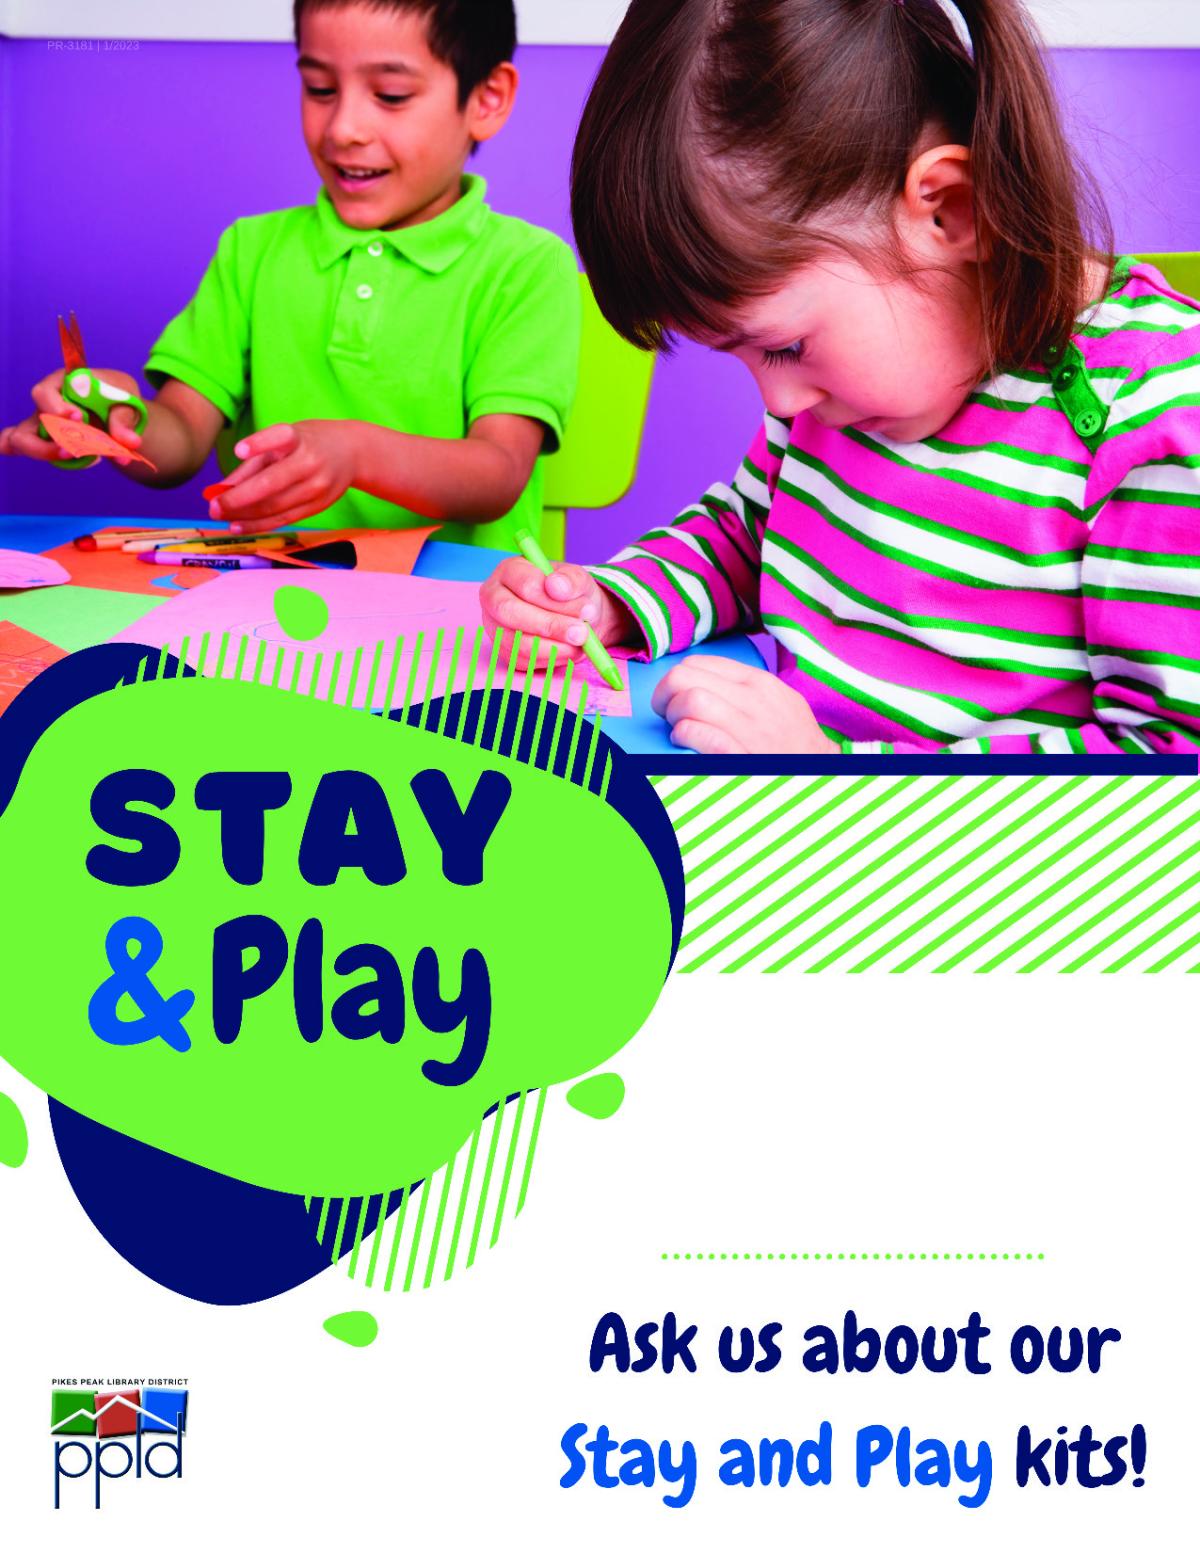 2 children palying with toys at a table, Stay and Play logo in foreground, blue letters on green background